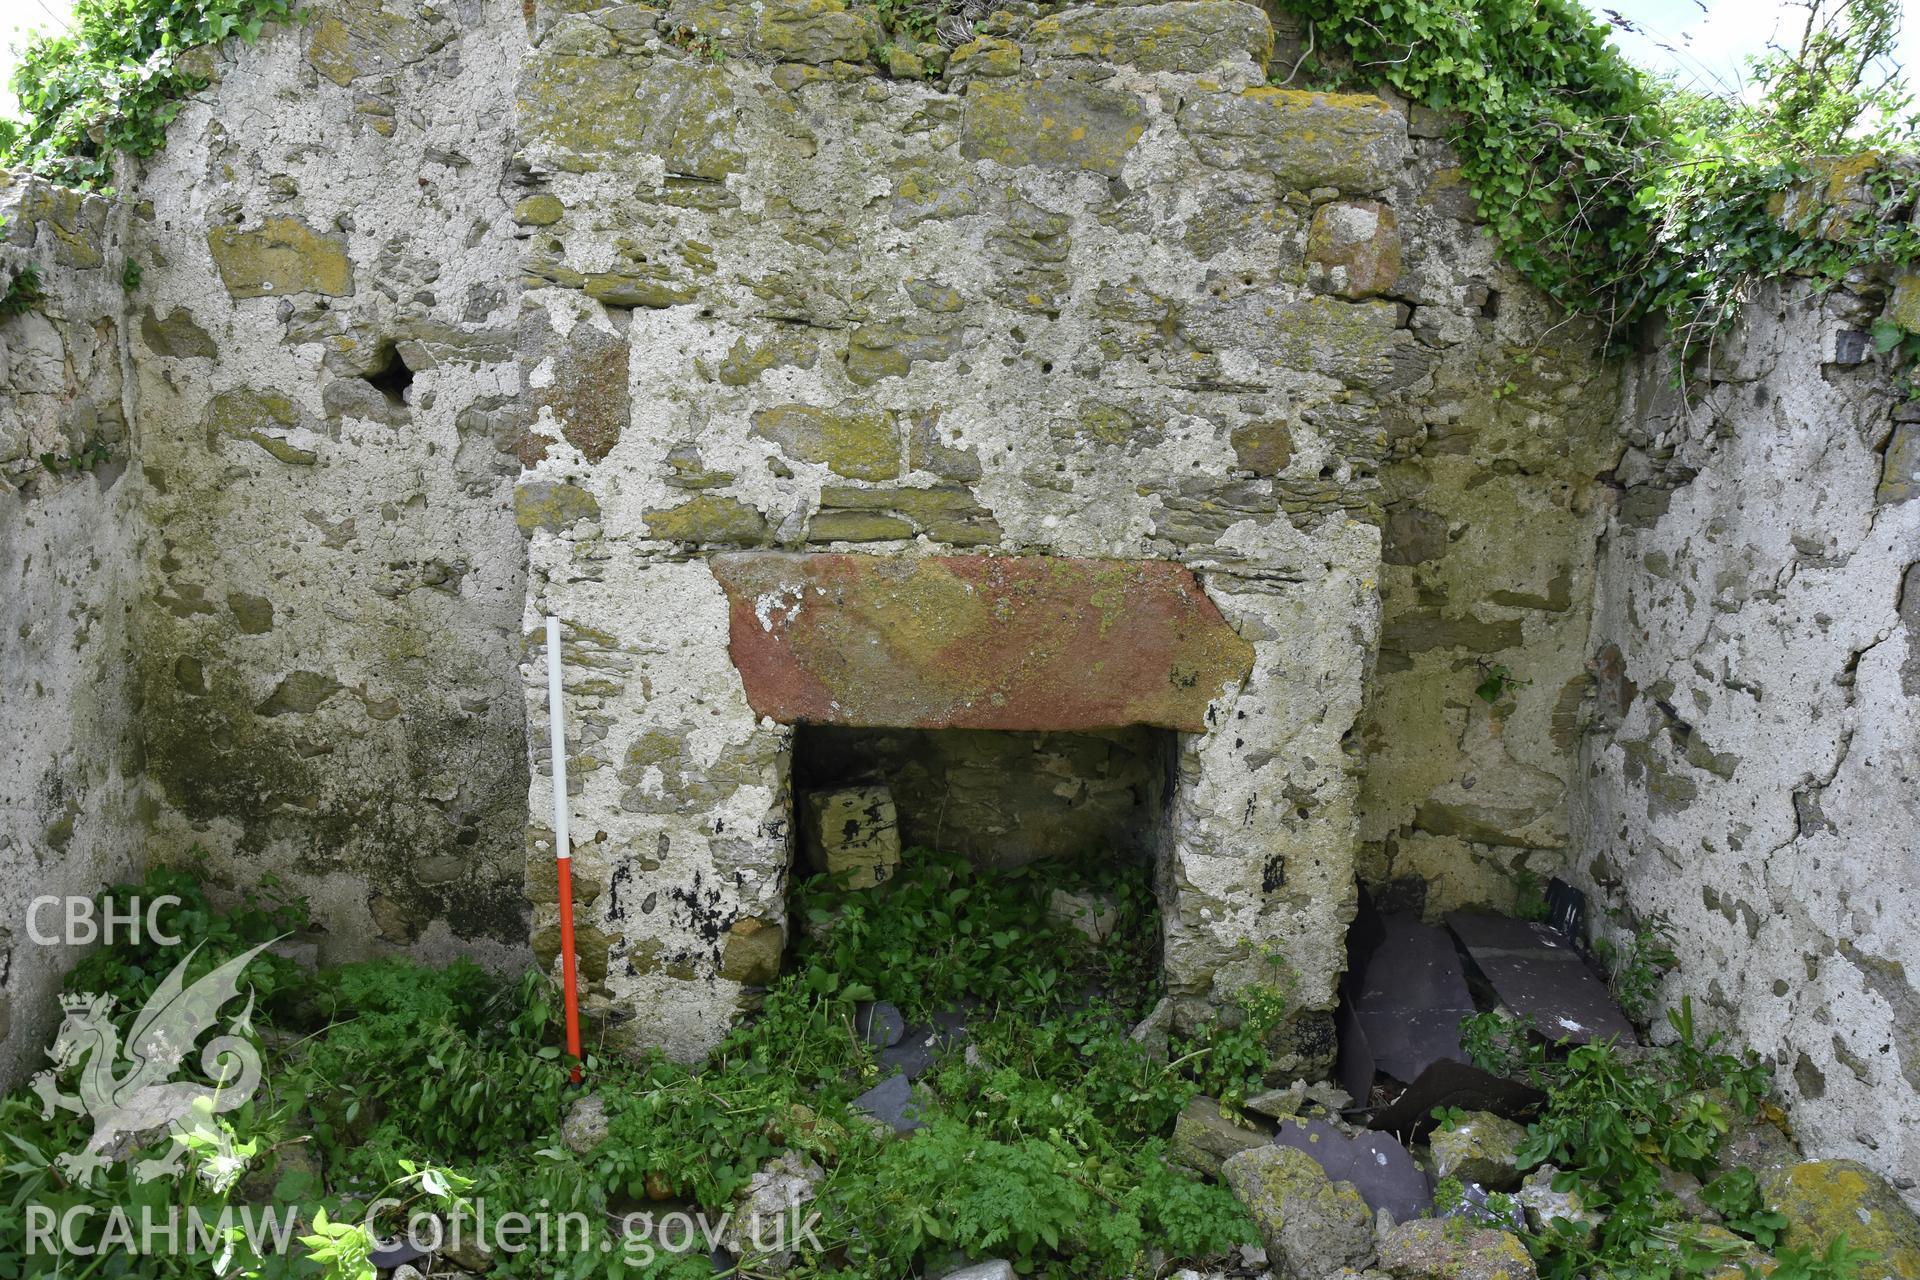 Investigator's photographic survey of the church on Puffin Island or Ynys Seiriol for the CHERISH Project. View showing the post medieval cottage on the south side of the tower, occupying the former transept of the church. ? Crown: CHERISH PROJECT 2018. Produced with EU funds through the Ireland Wales Co-operation Programme 2014-2020. All material made freely available through the Open Government Licence.